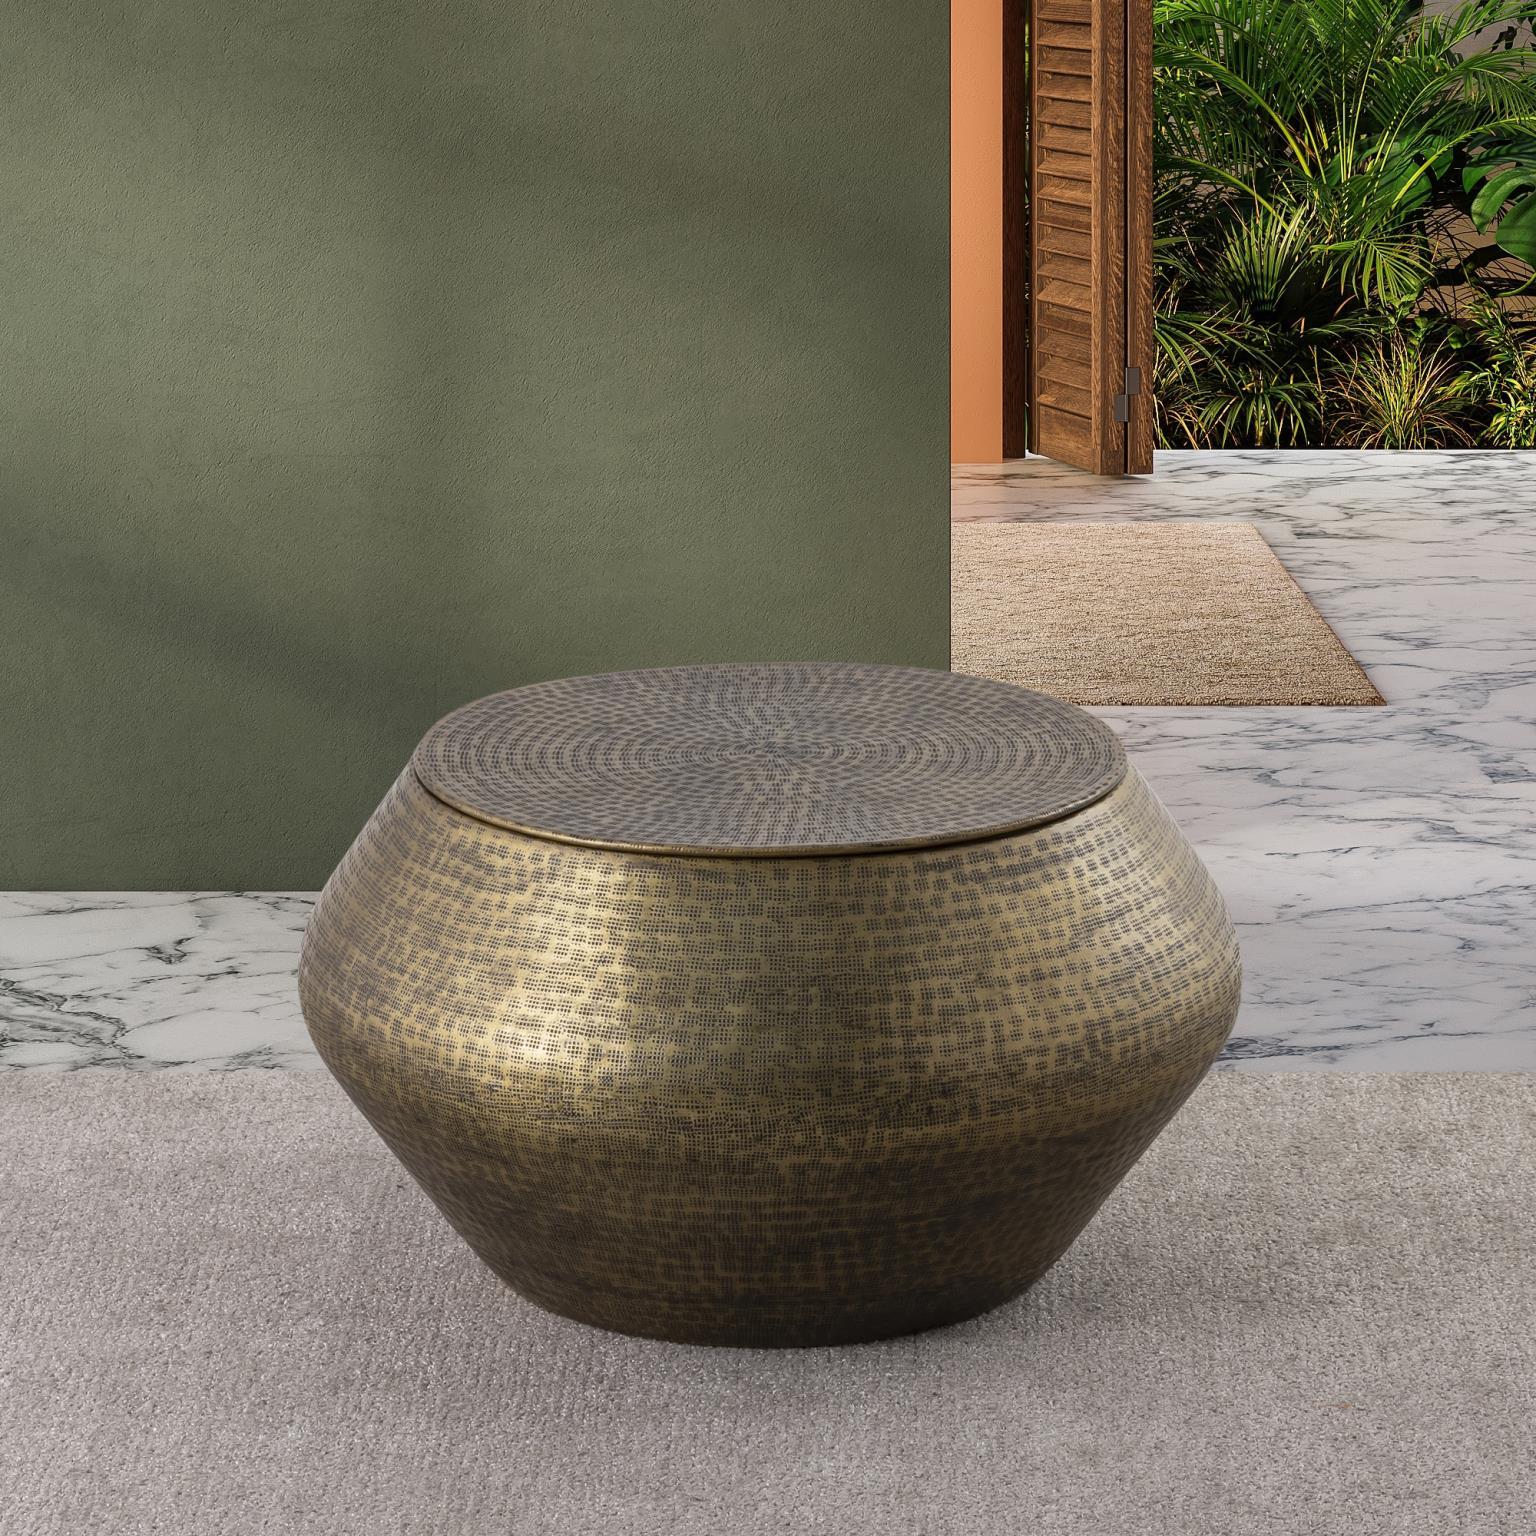 Contemporary, Modern Coffee Table T5203-29 Drum Coffee Table 718852652659 718852652659 in Brass 